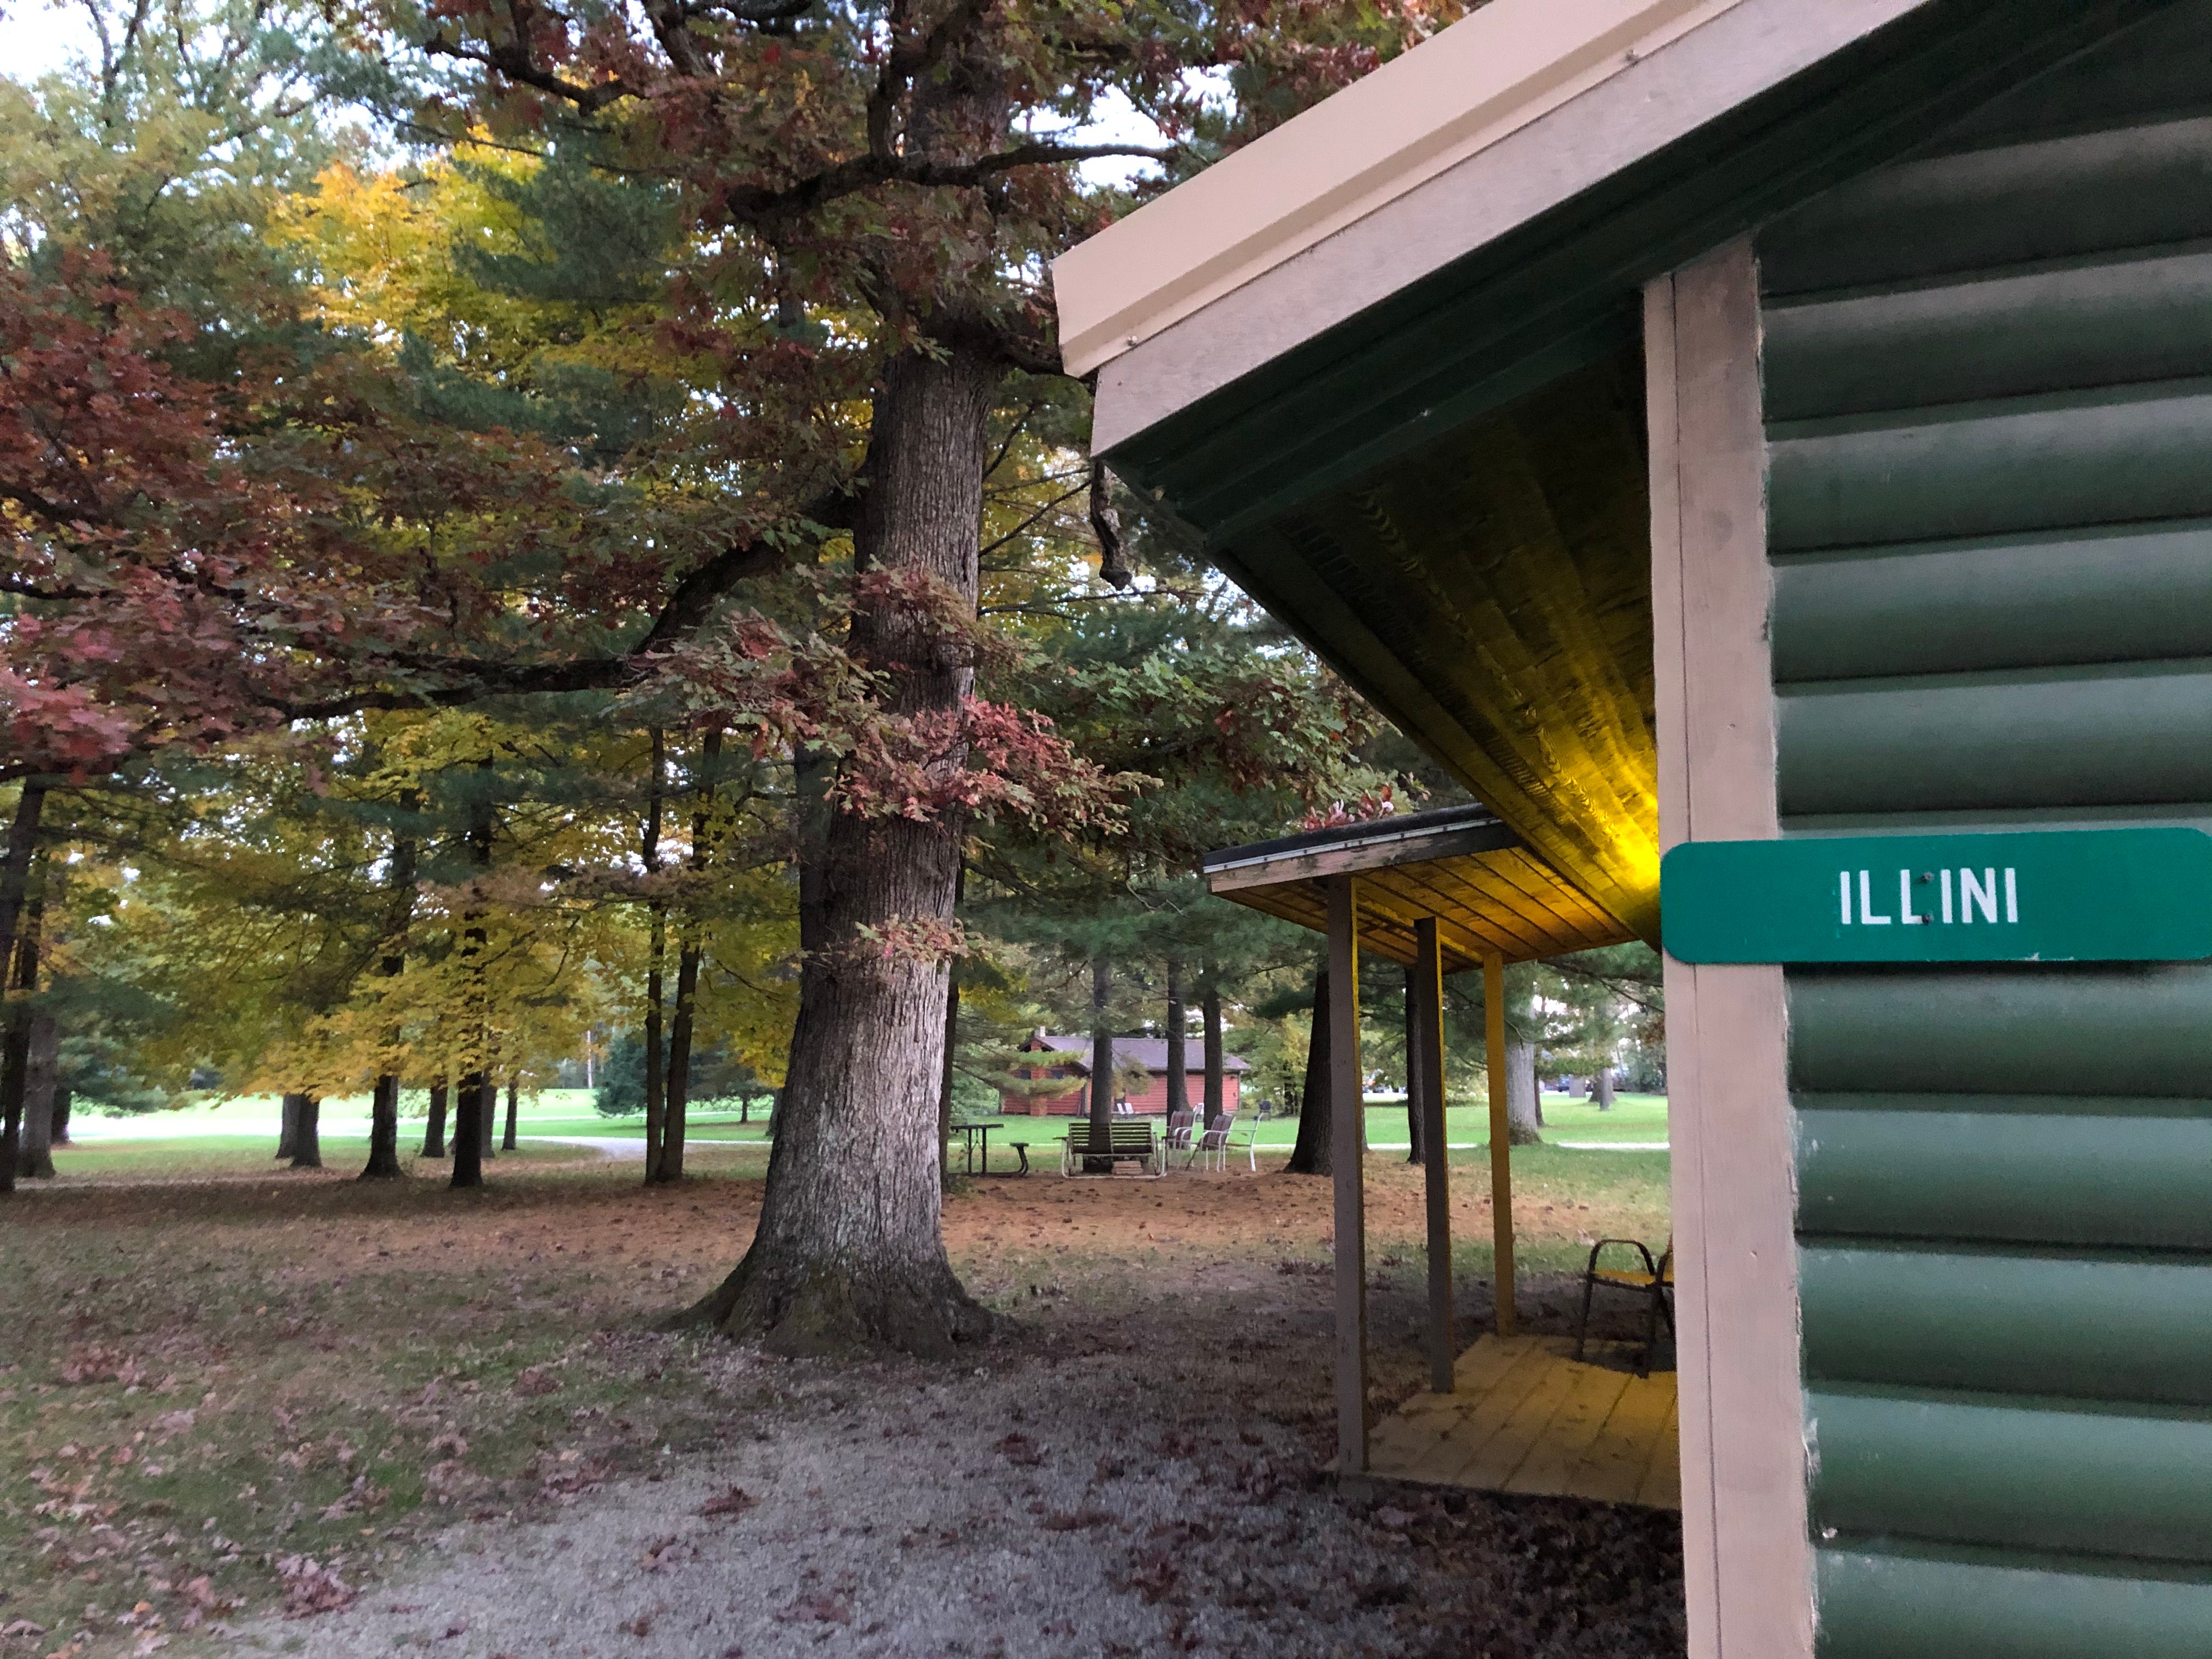 Cabins are well spaced out for privacy on our 65 acre wooded property.